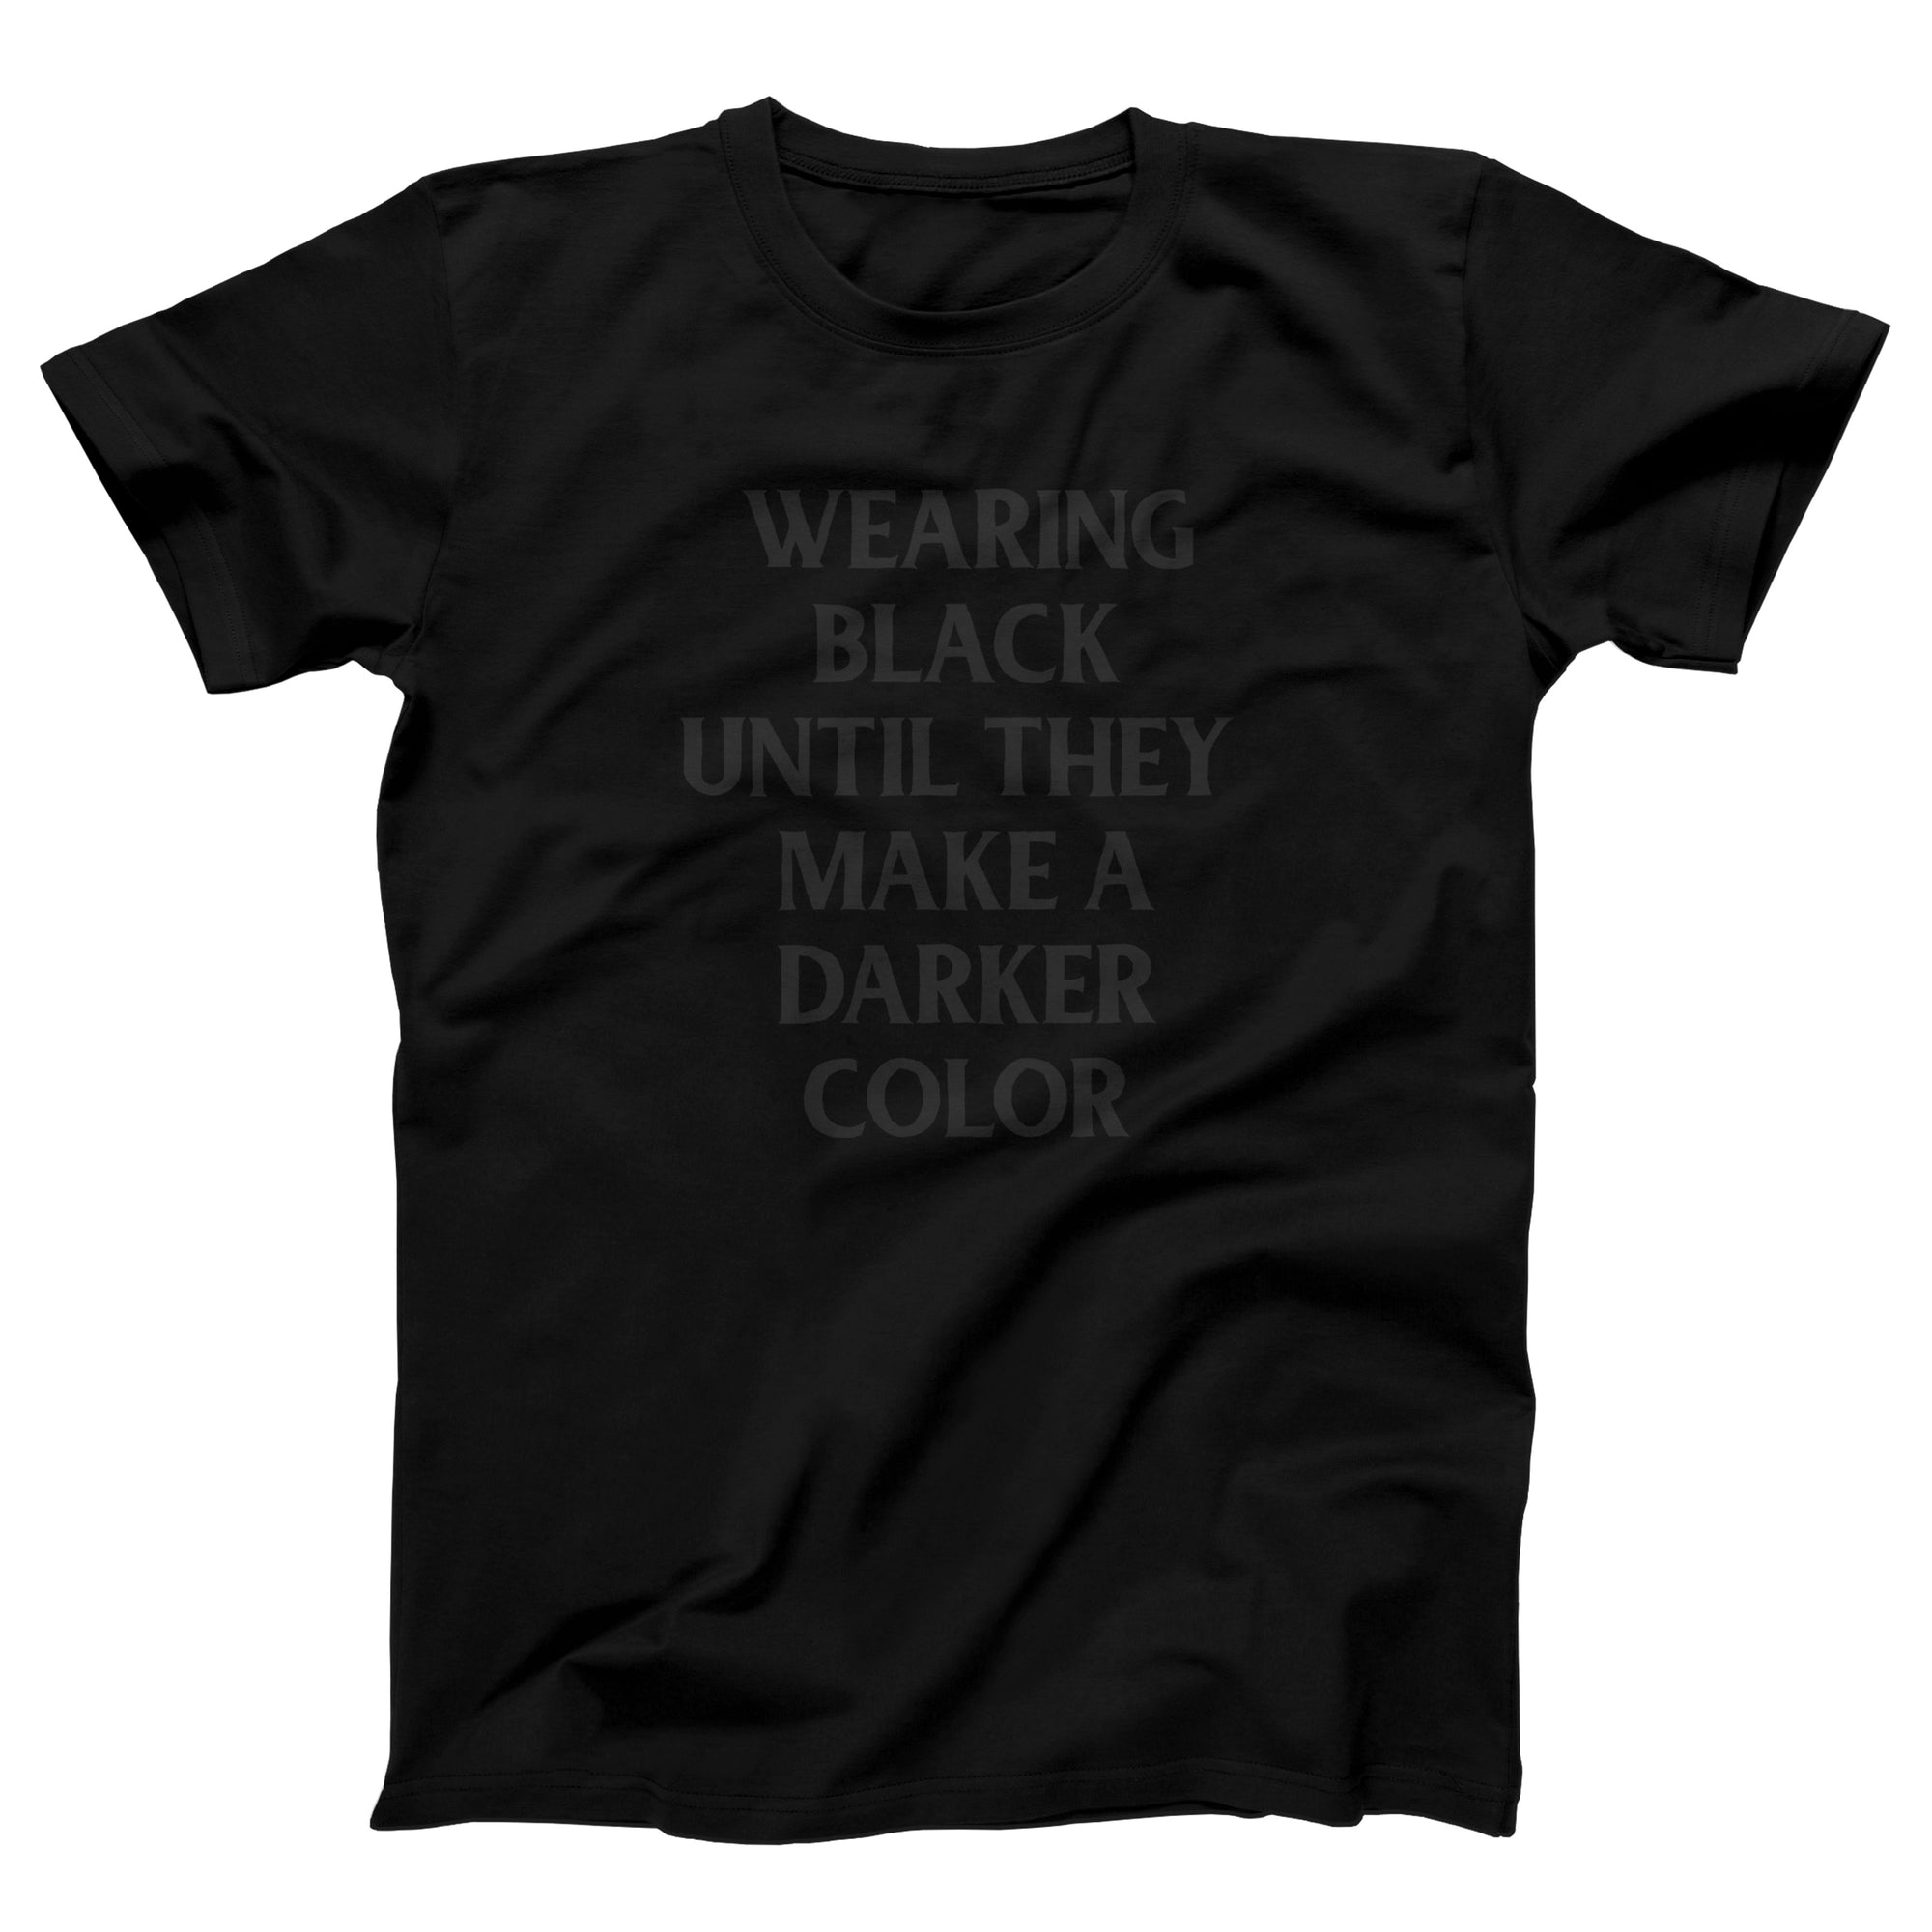 Wearing Black Until They Make A Darker Color Adult Unisex T-Shirt - Twisted Gorilla